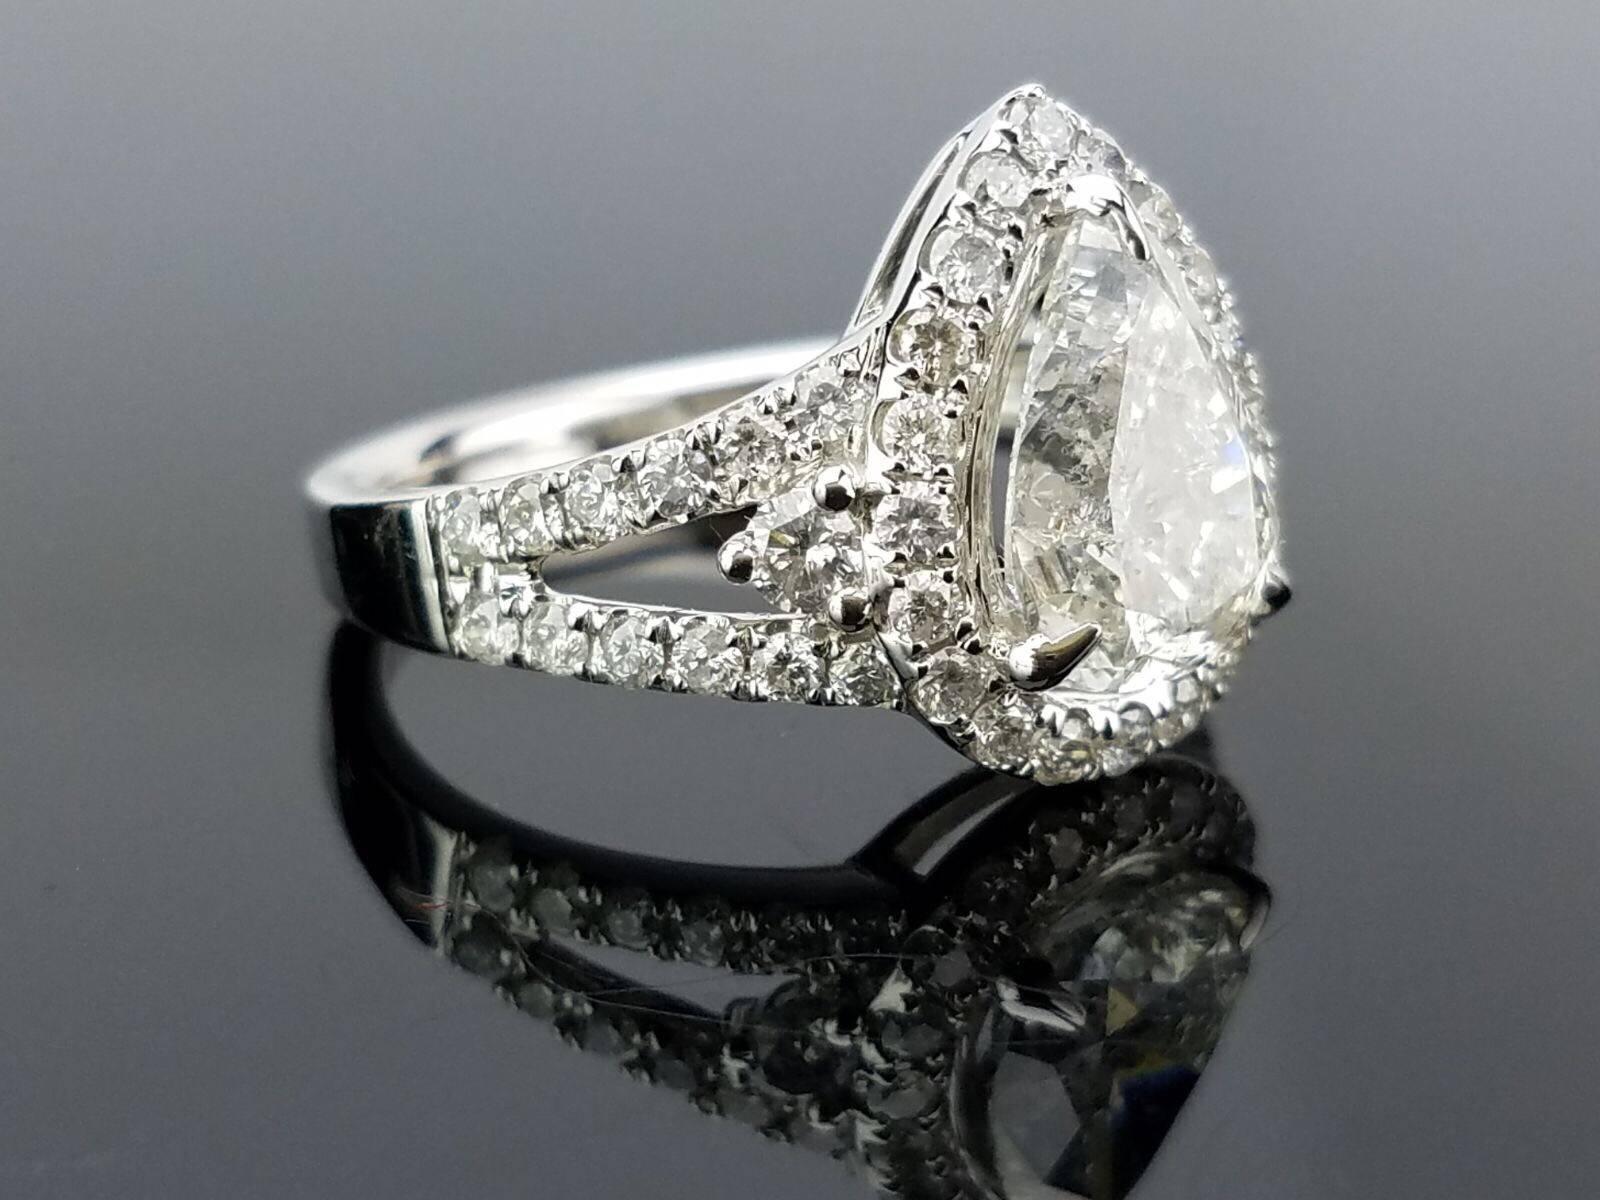 Statement pear shape diamond ring, with half moon side stones. 

Diamond Details: 
Cut: Pear shape
Carat Weight: 2.18 carat 
Quality: I

Cut: Half moon 
Carat Weight: 0.12 carat
Quality: SI/I

Cut: Brilliant (round)
Carat Weight/l 0.70
Quality: